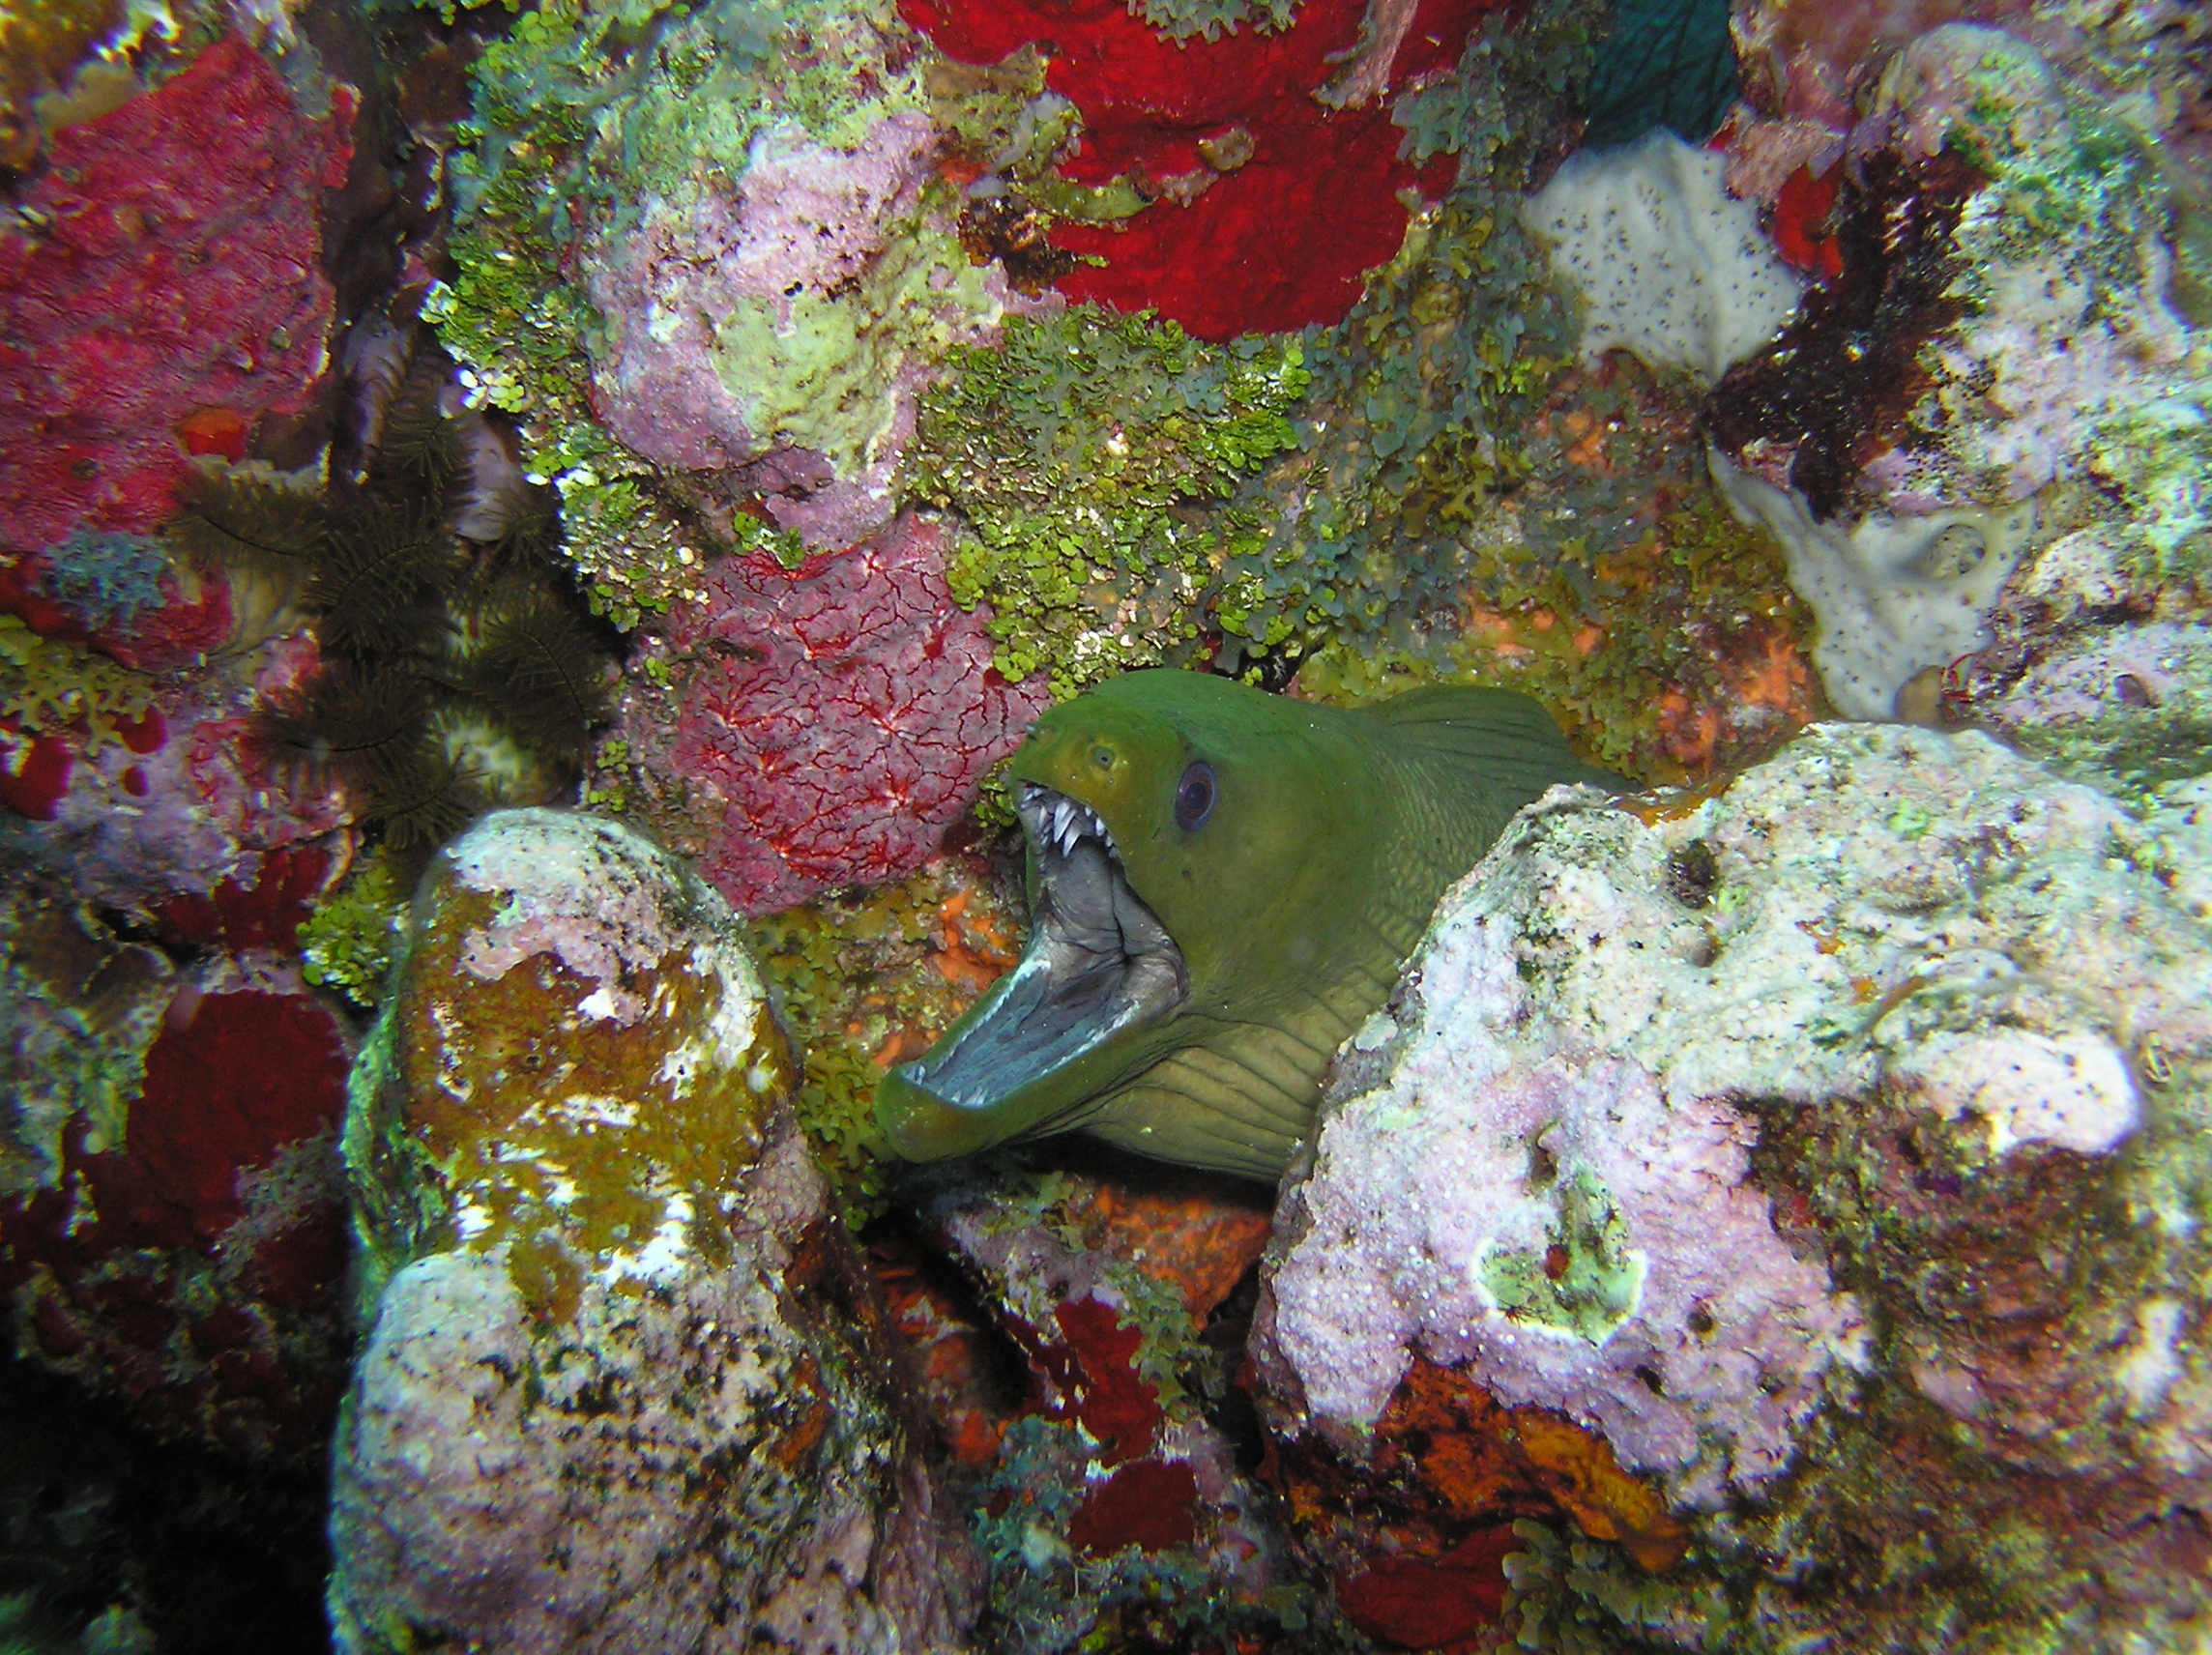 A mean looking Green Moray